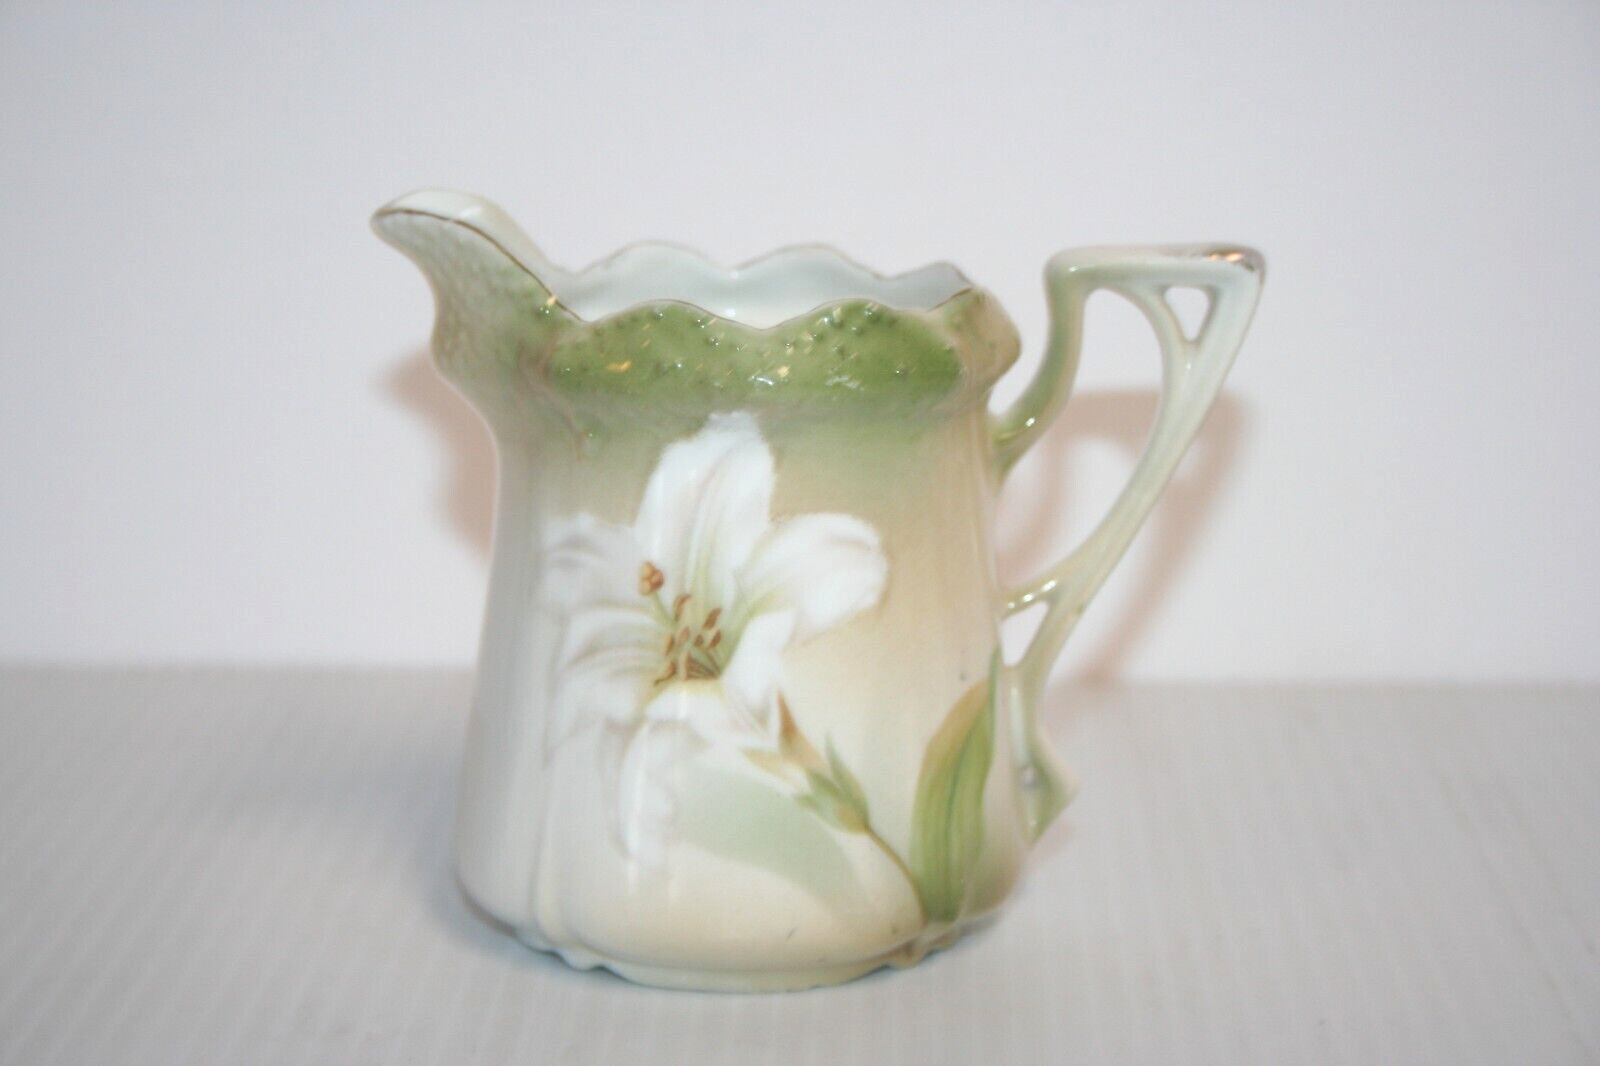 R S Germany White Lily Creamer Pitcher Porcelain Ornate Embossed Hand Decorated